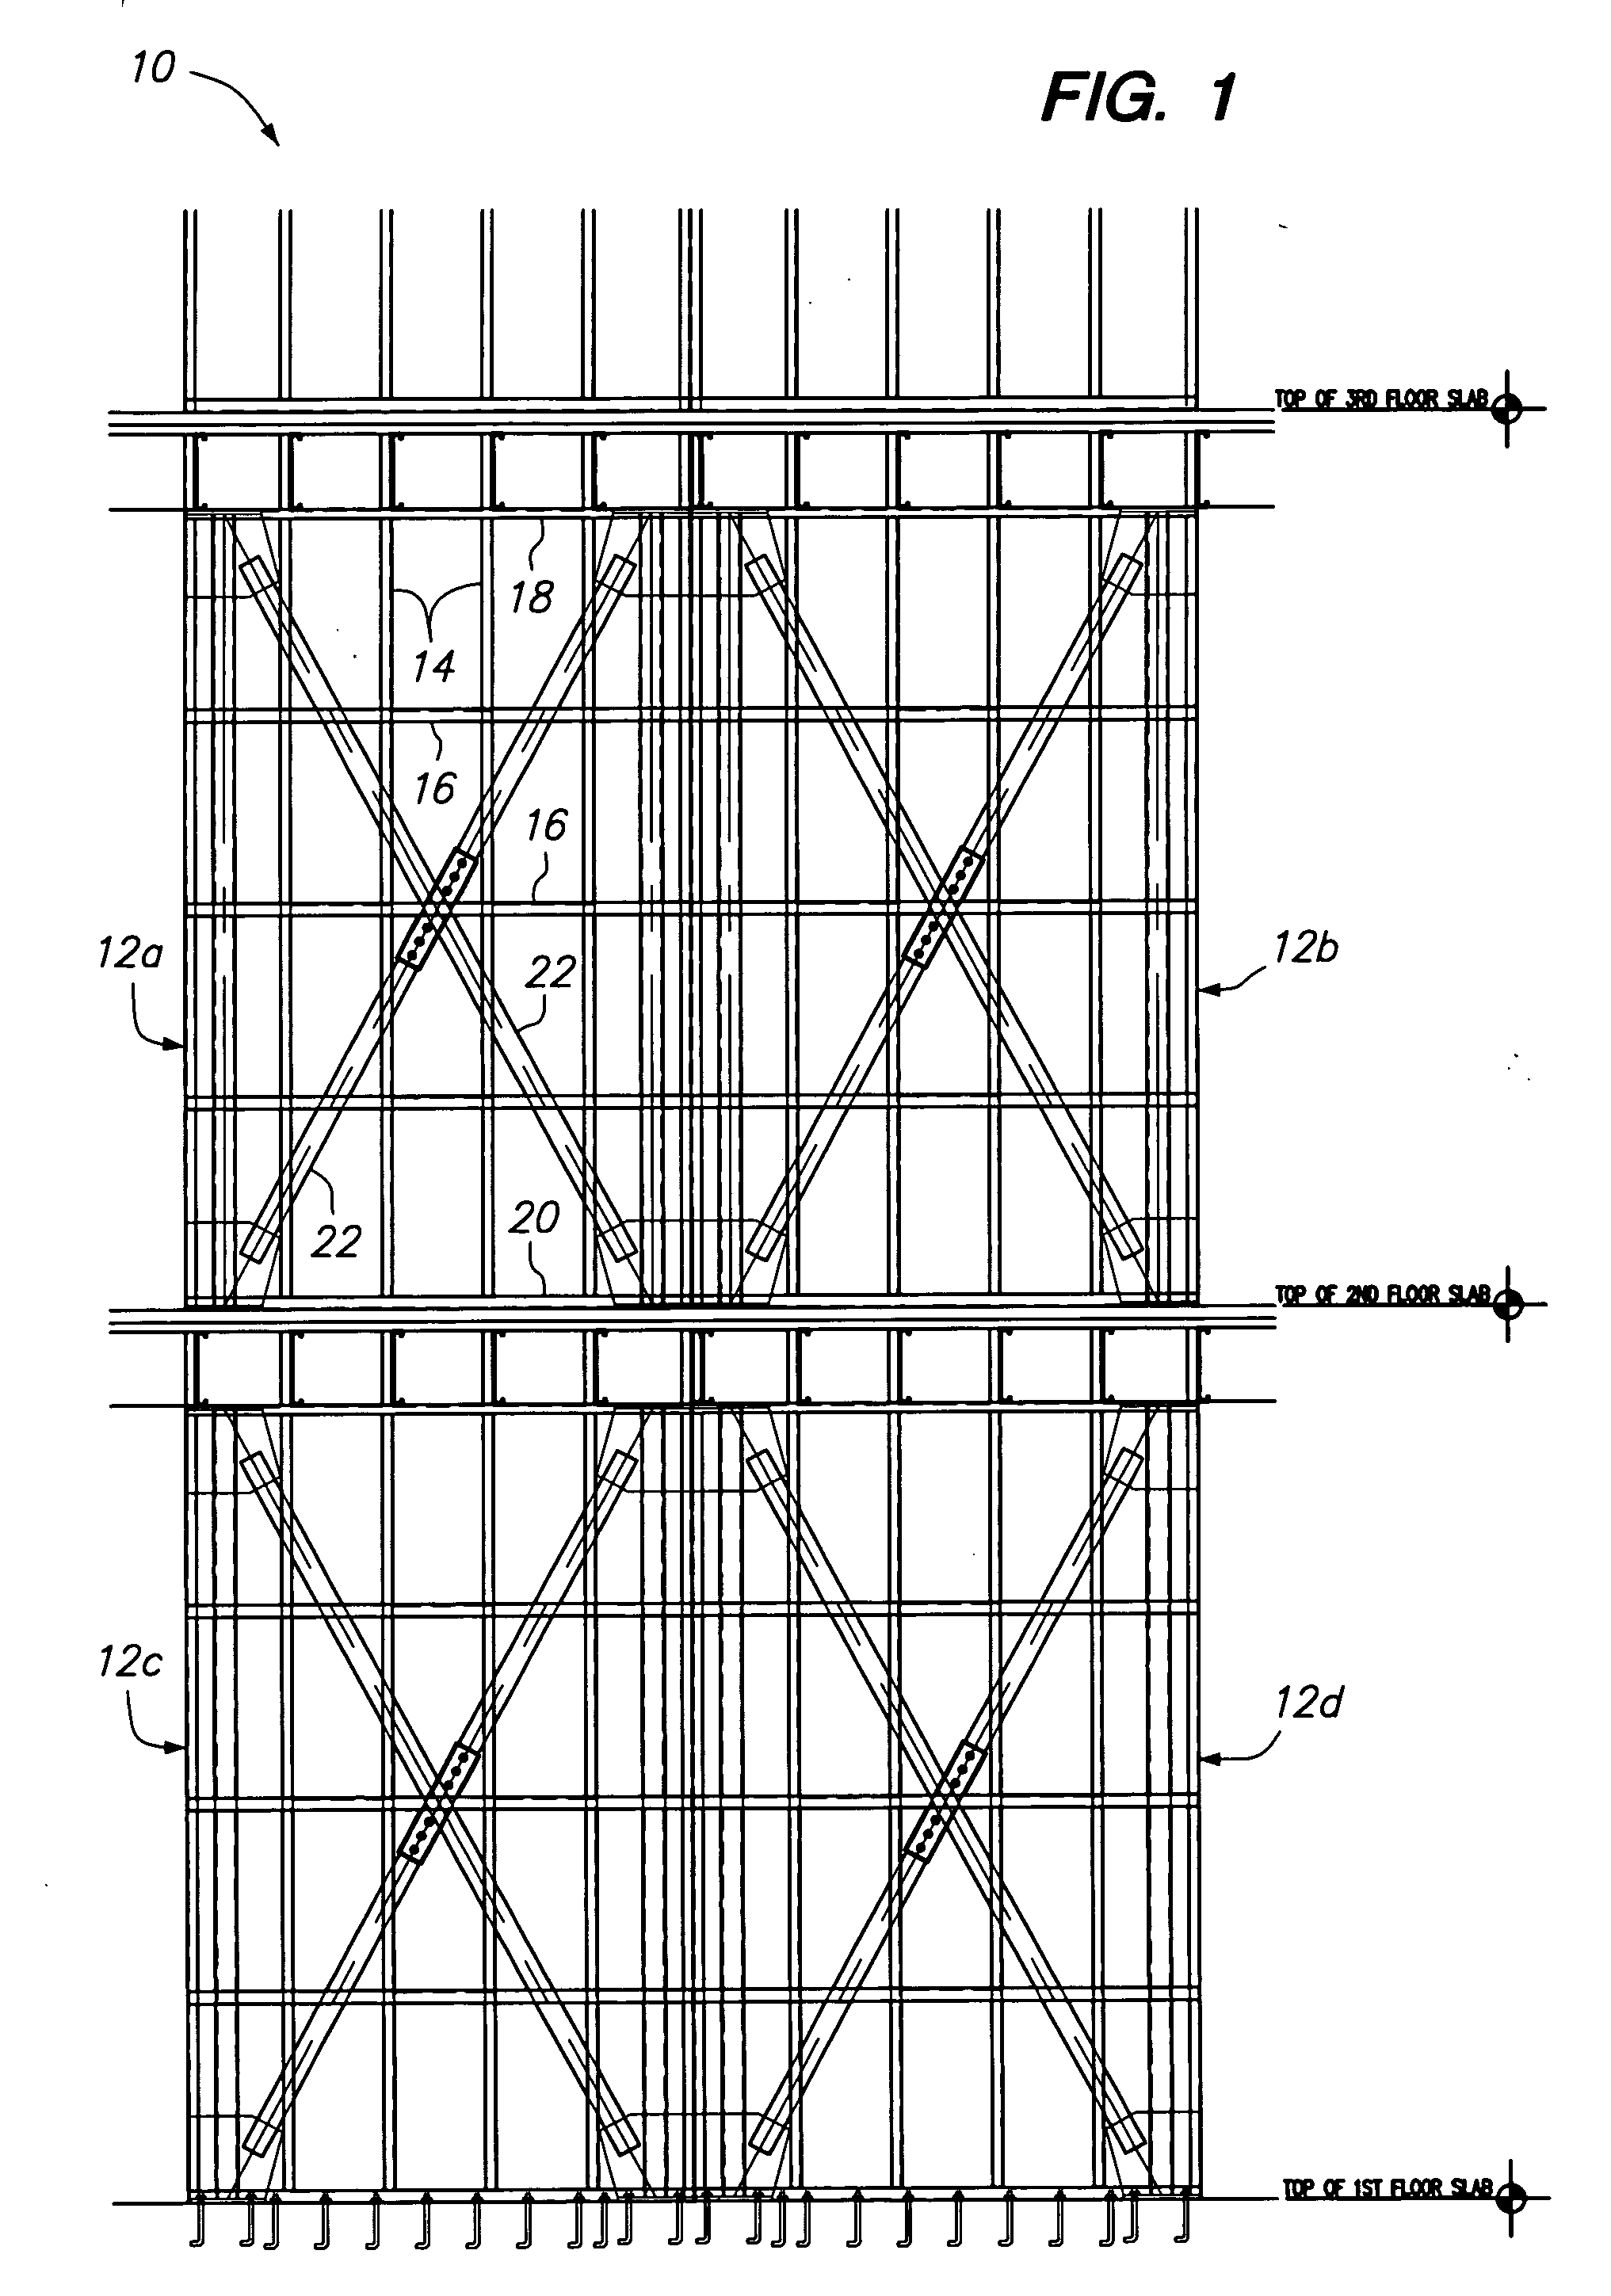 Structural braced frame wall panel system